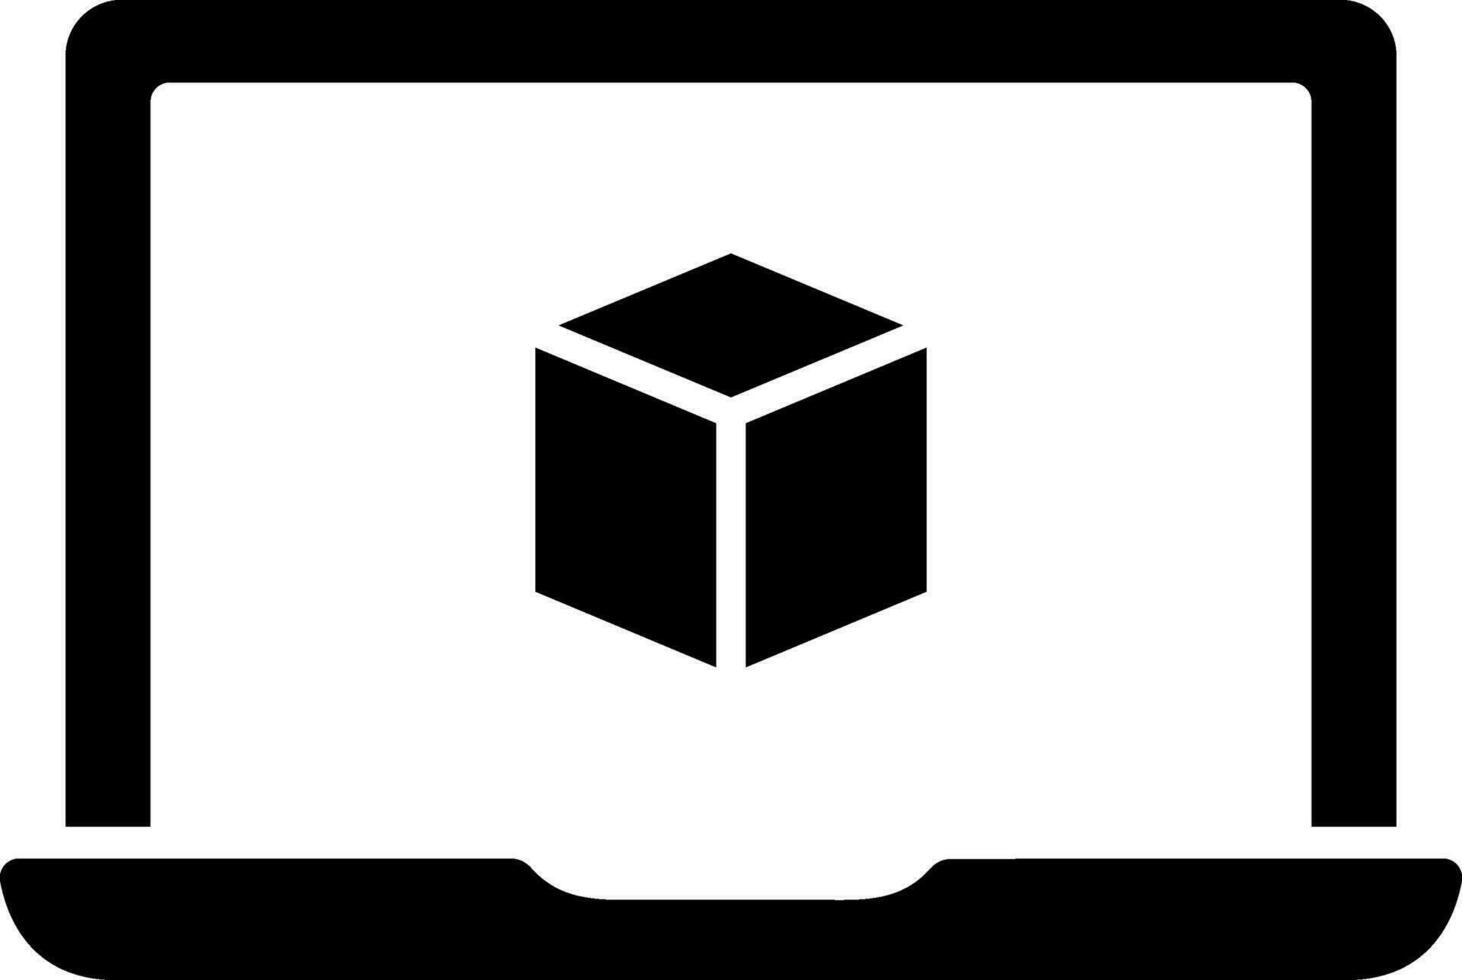 Cube or block on laptop screen icon in Black and White color. vector